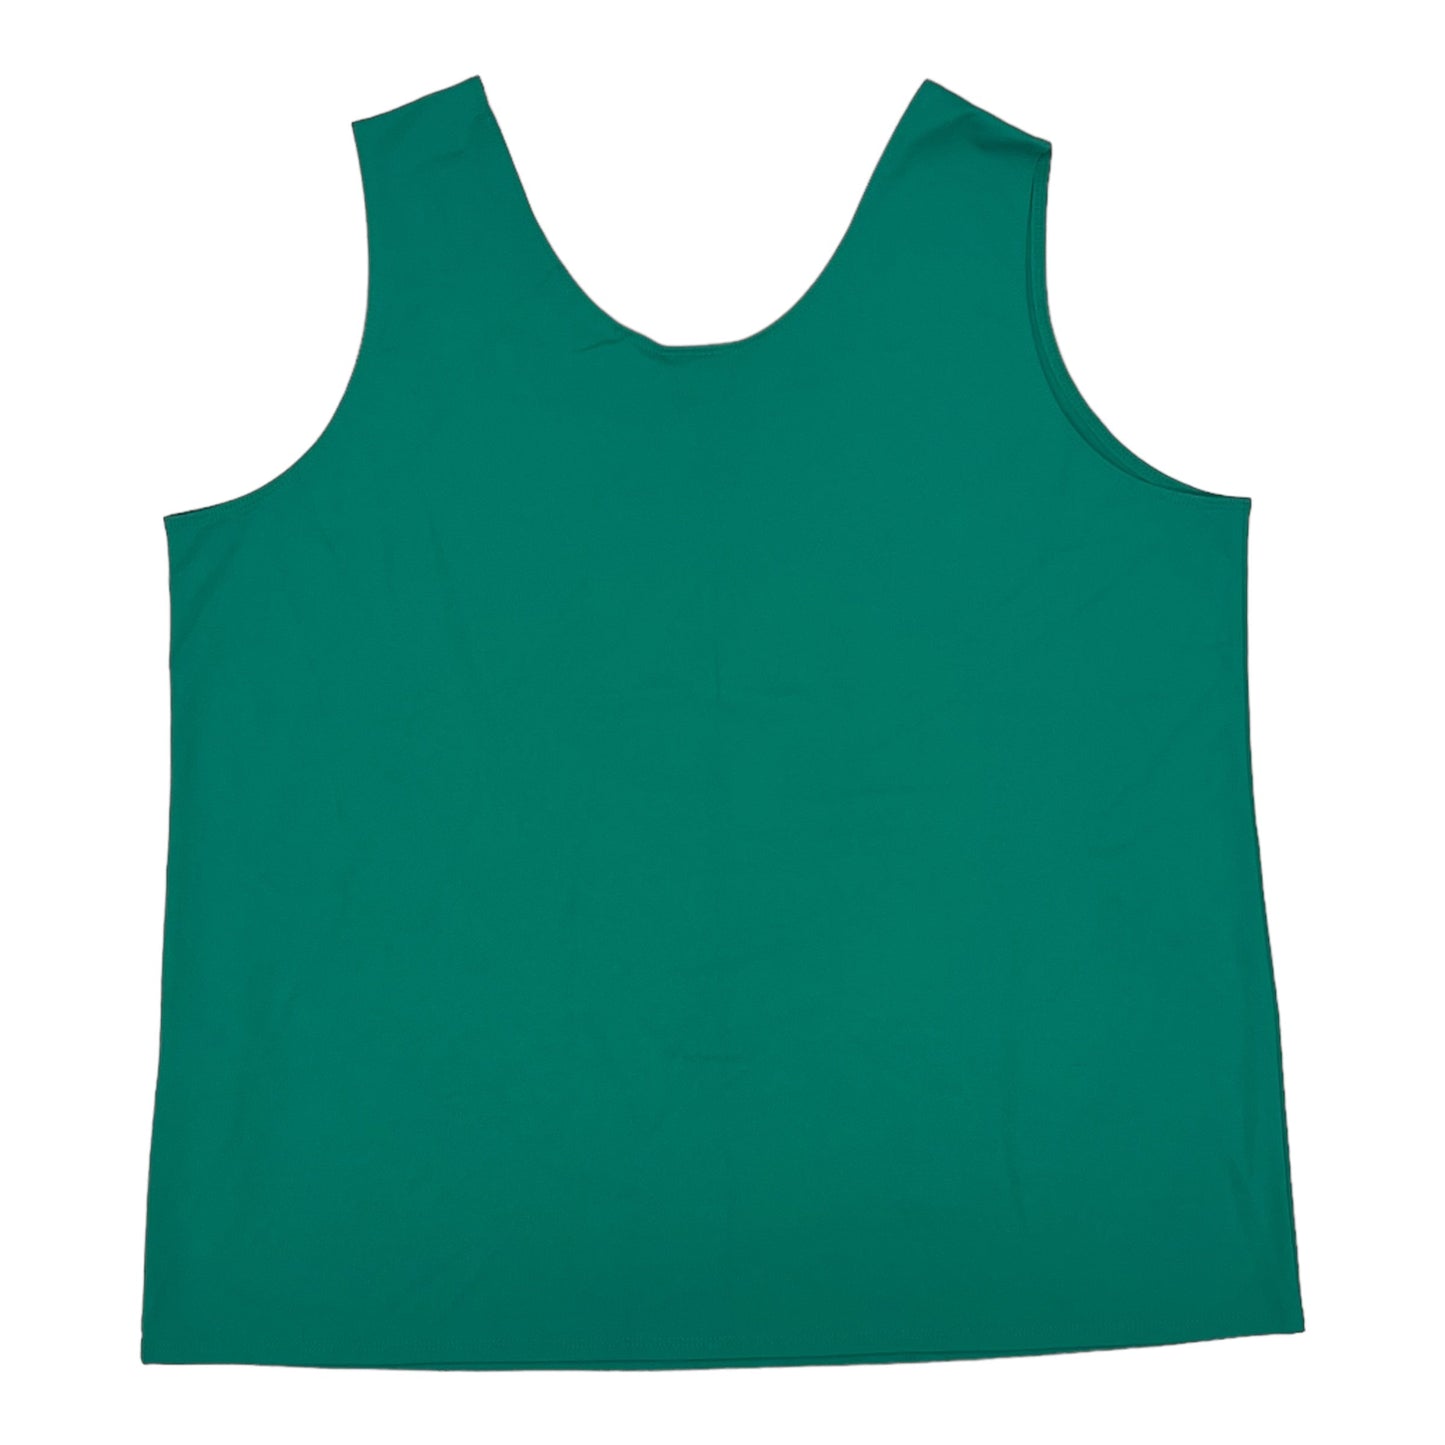 GREEN CHICOS TANK TOP, Size 2X